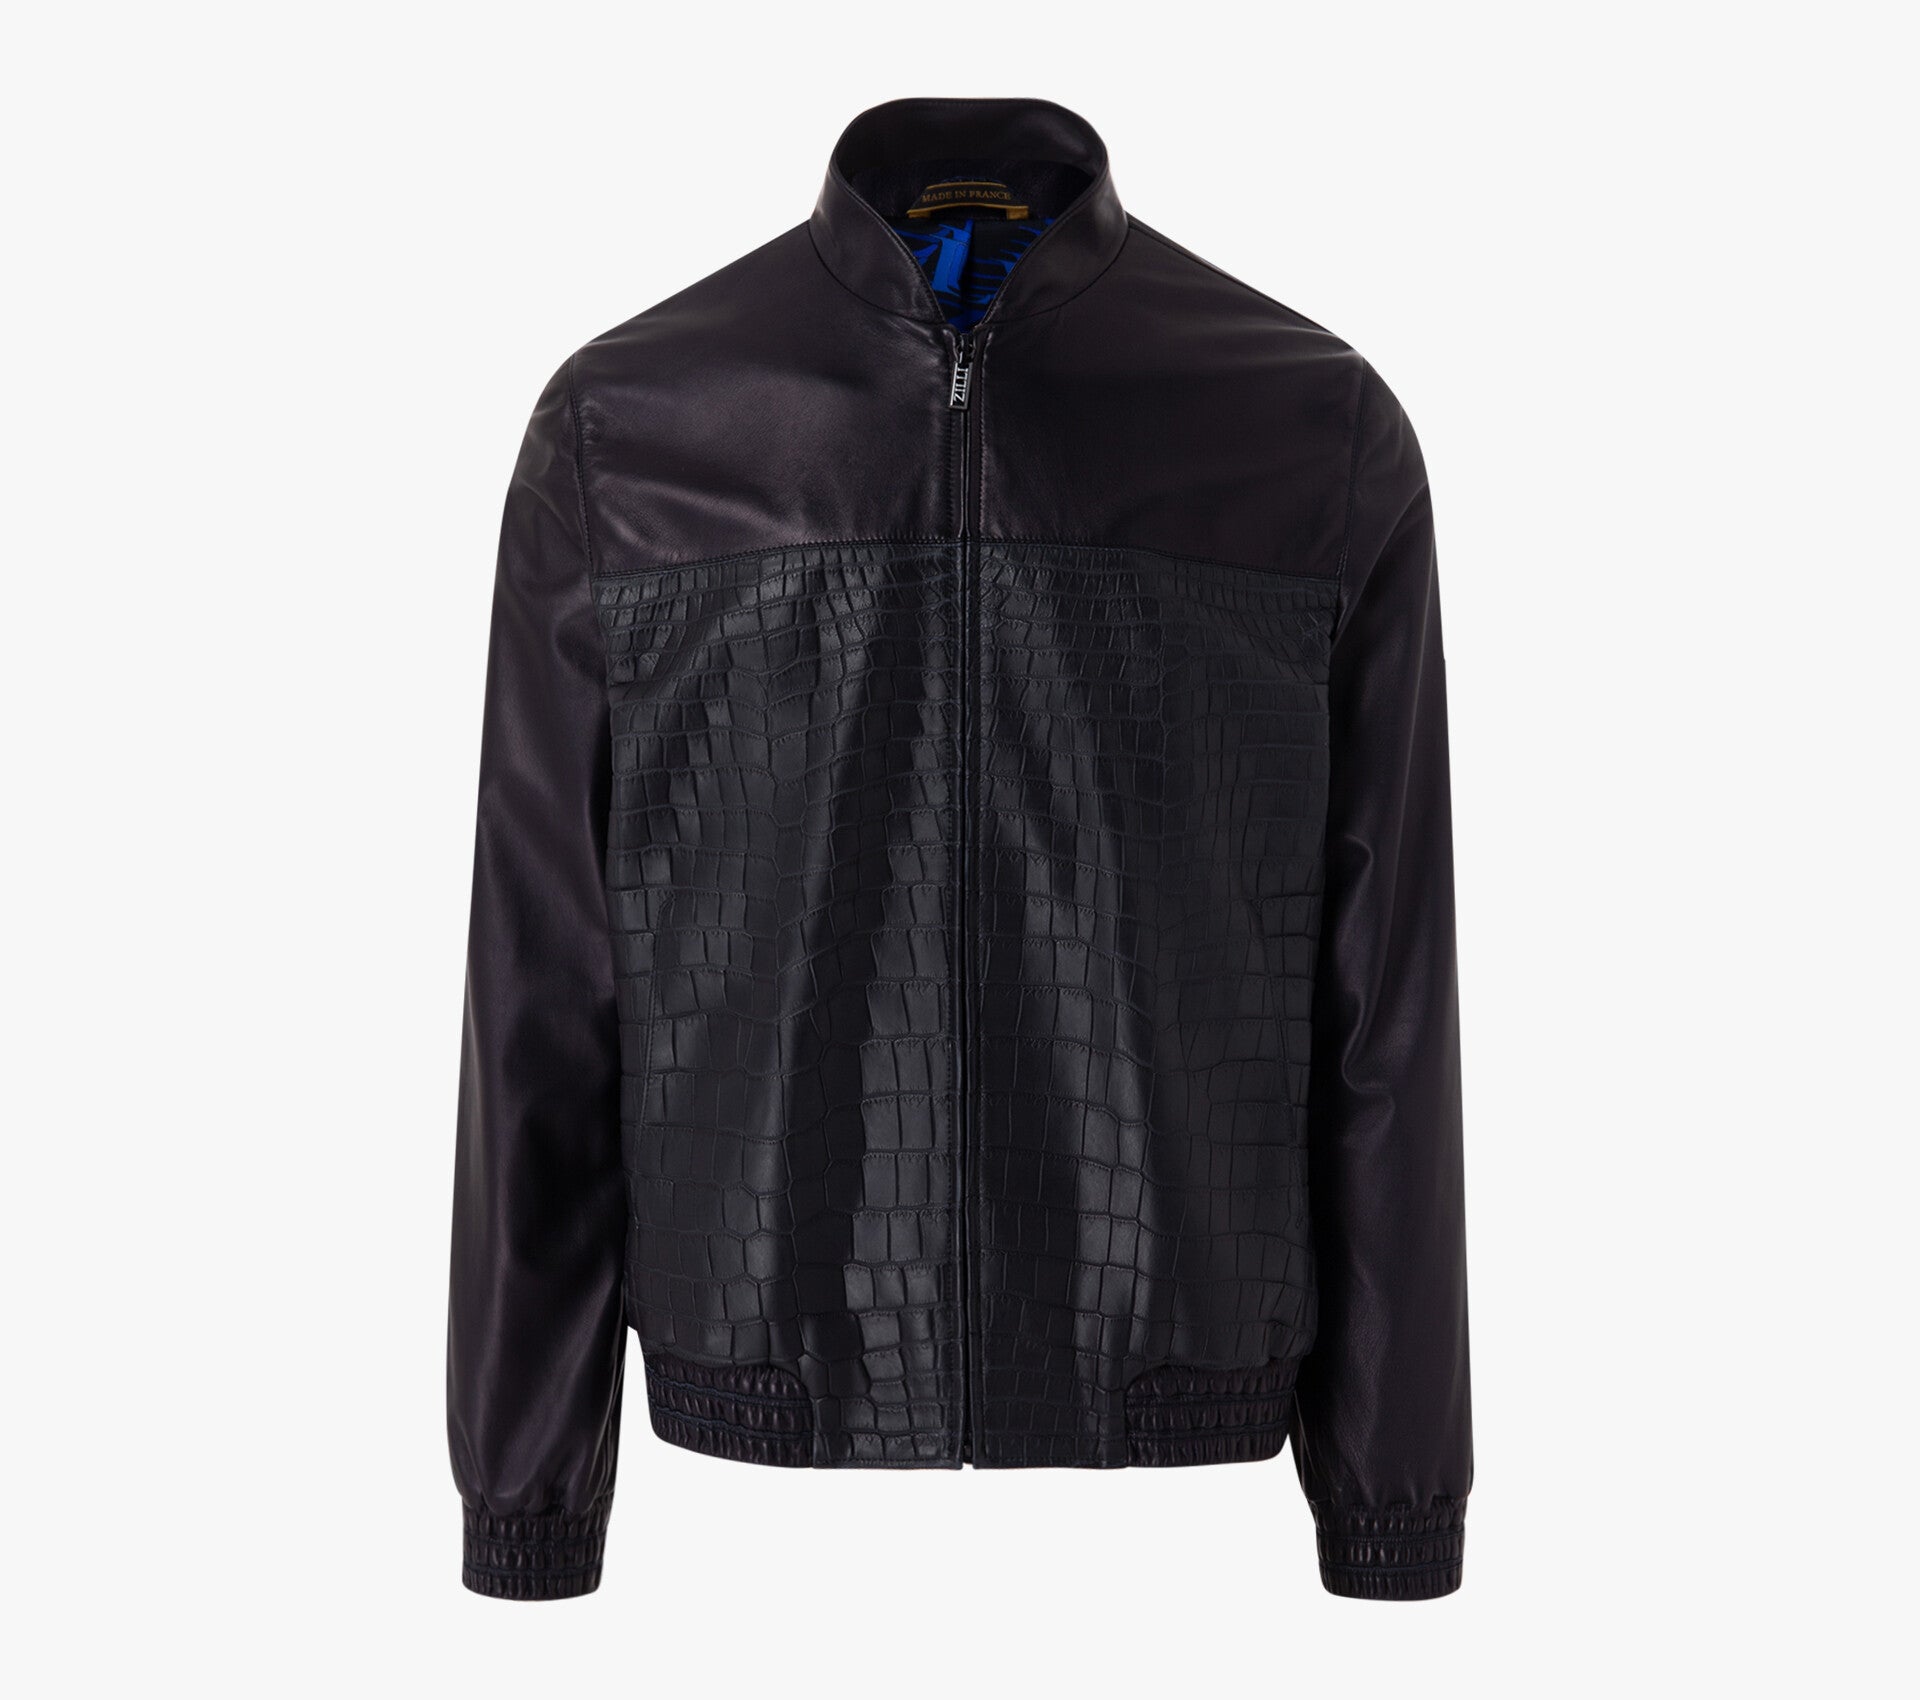 Zilli Notte Blouson with Silk Lining